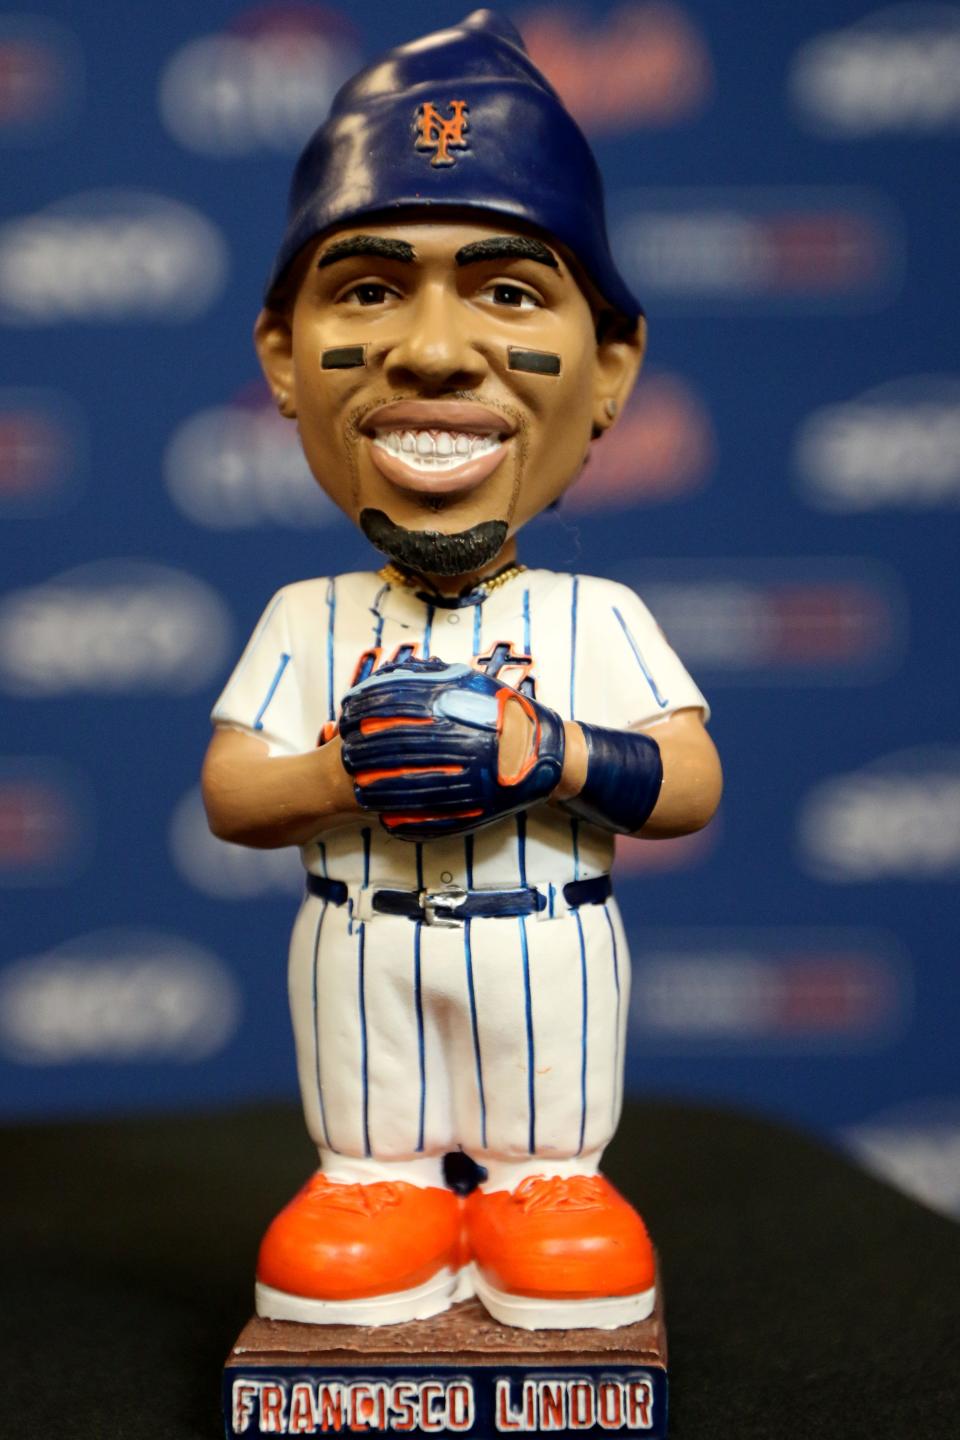 The Francisco Lindor bobblehead will be given away during a game at Citi Field this spring. Thursday, March 31, 2022